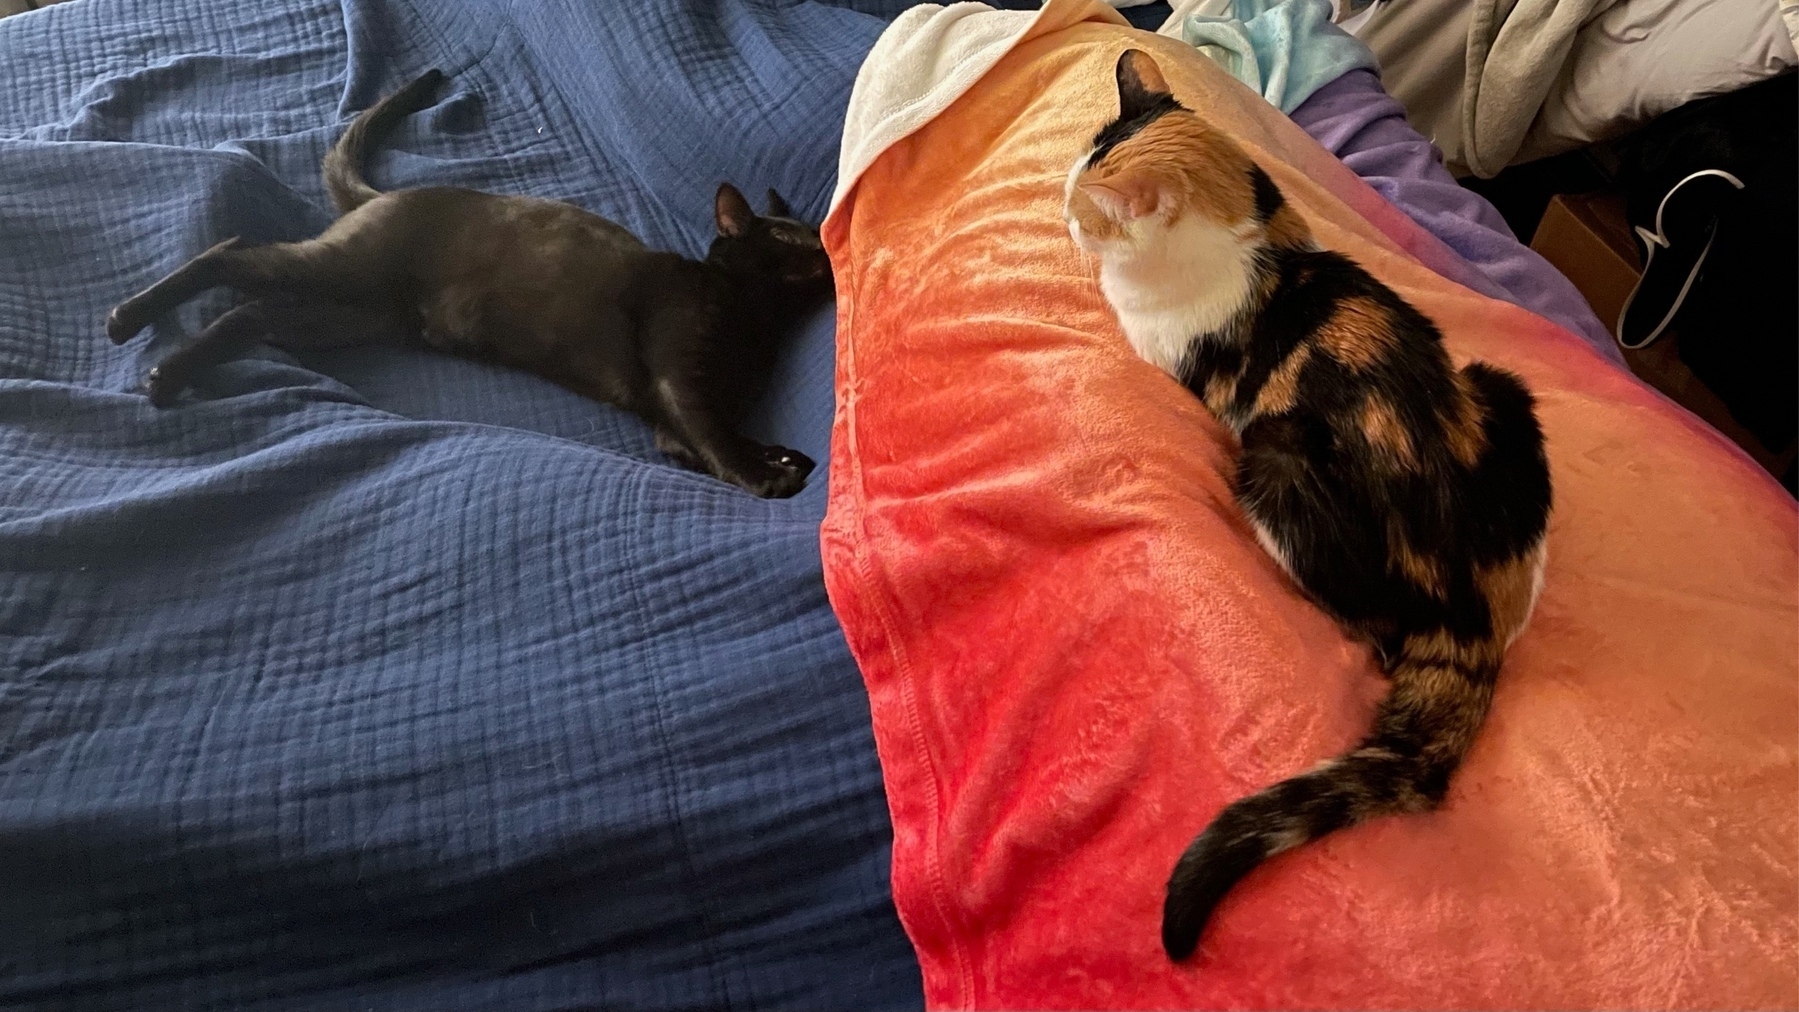 Two cats on a bed one, a calico, lays ona human's blanket covered legs. The other, a black adolescent cat, lays stretched out perpendicular to the other cat. They're close but not touching